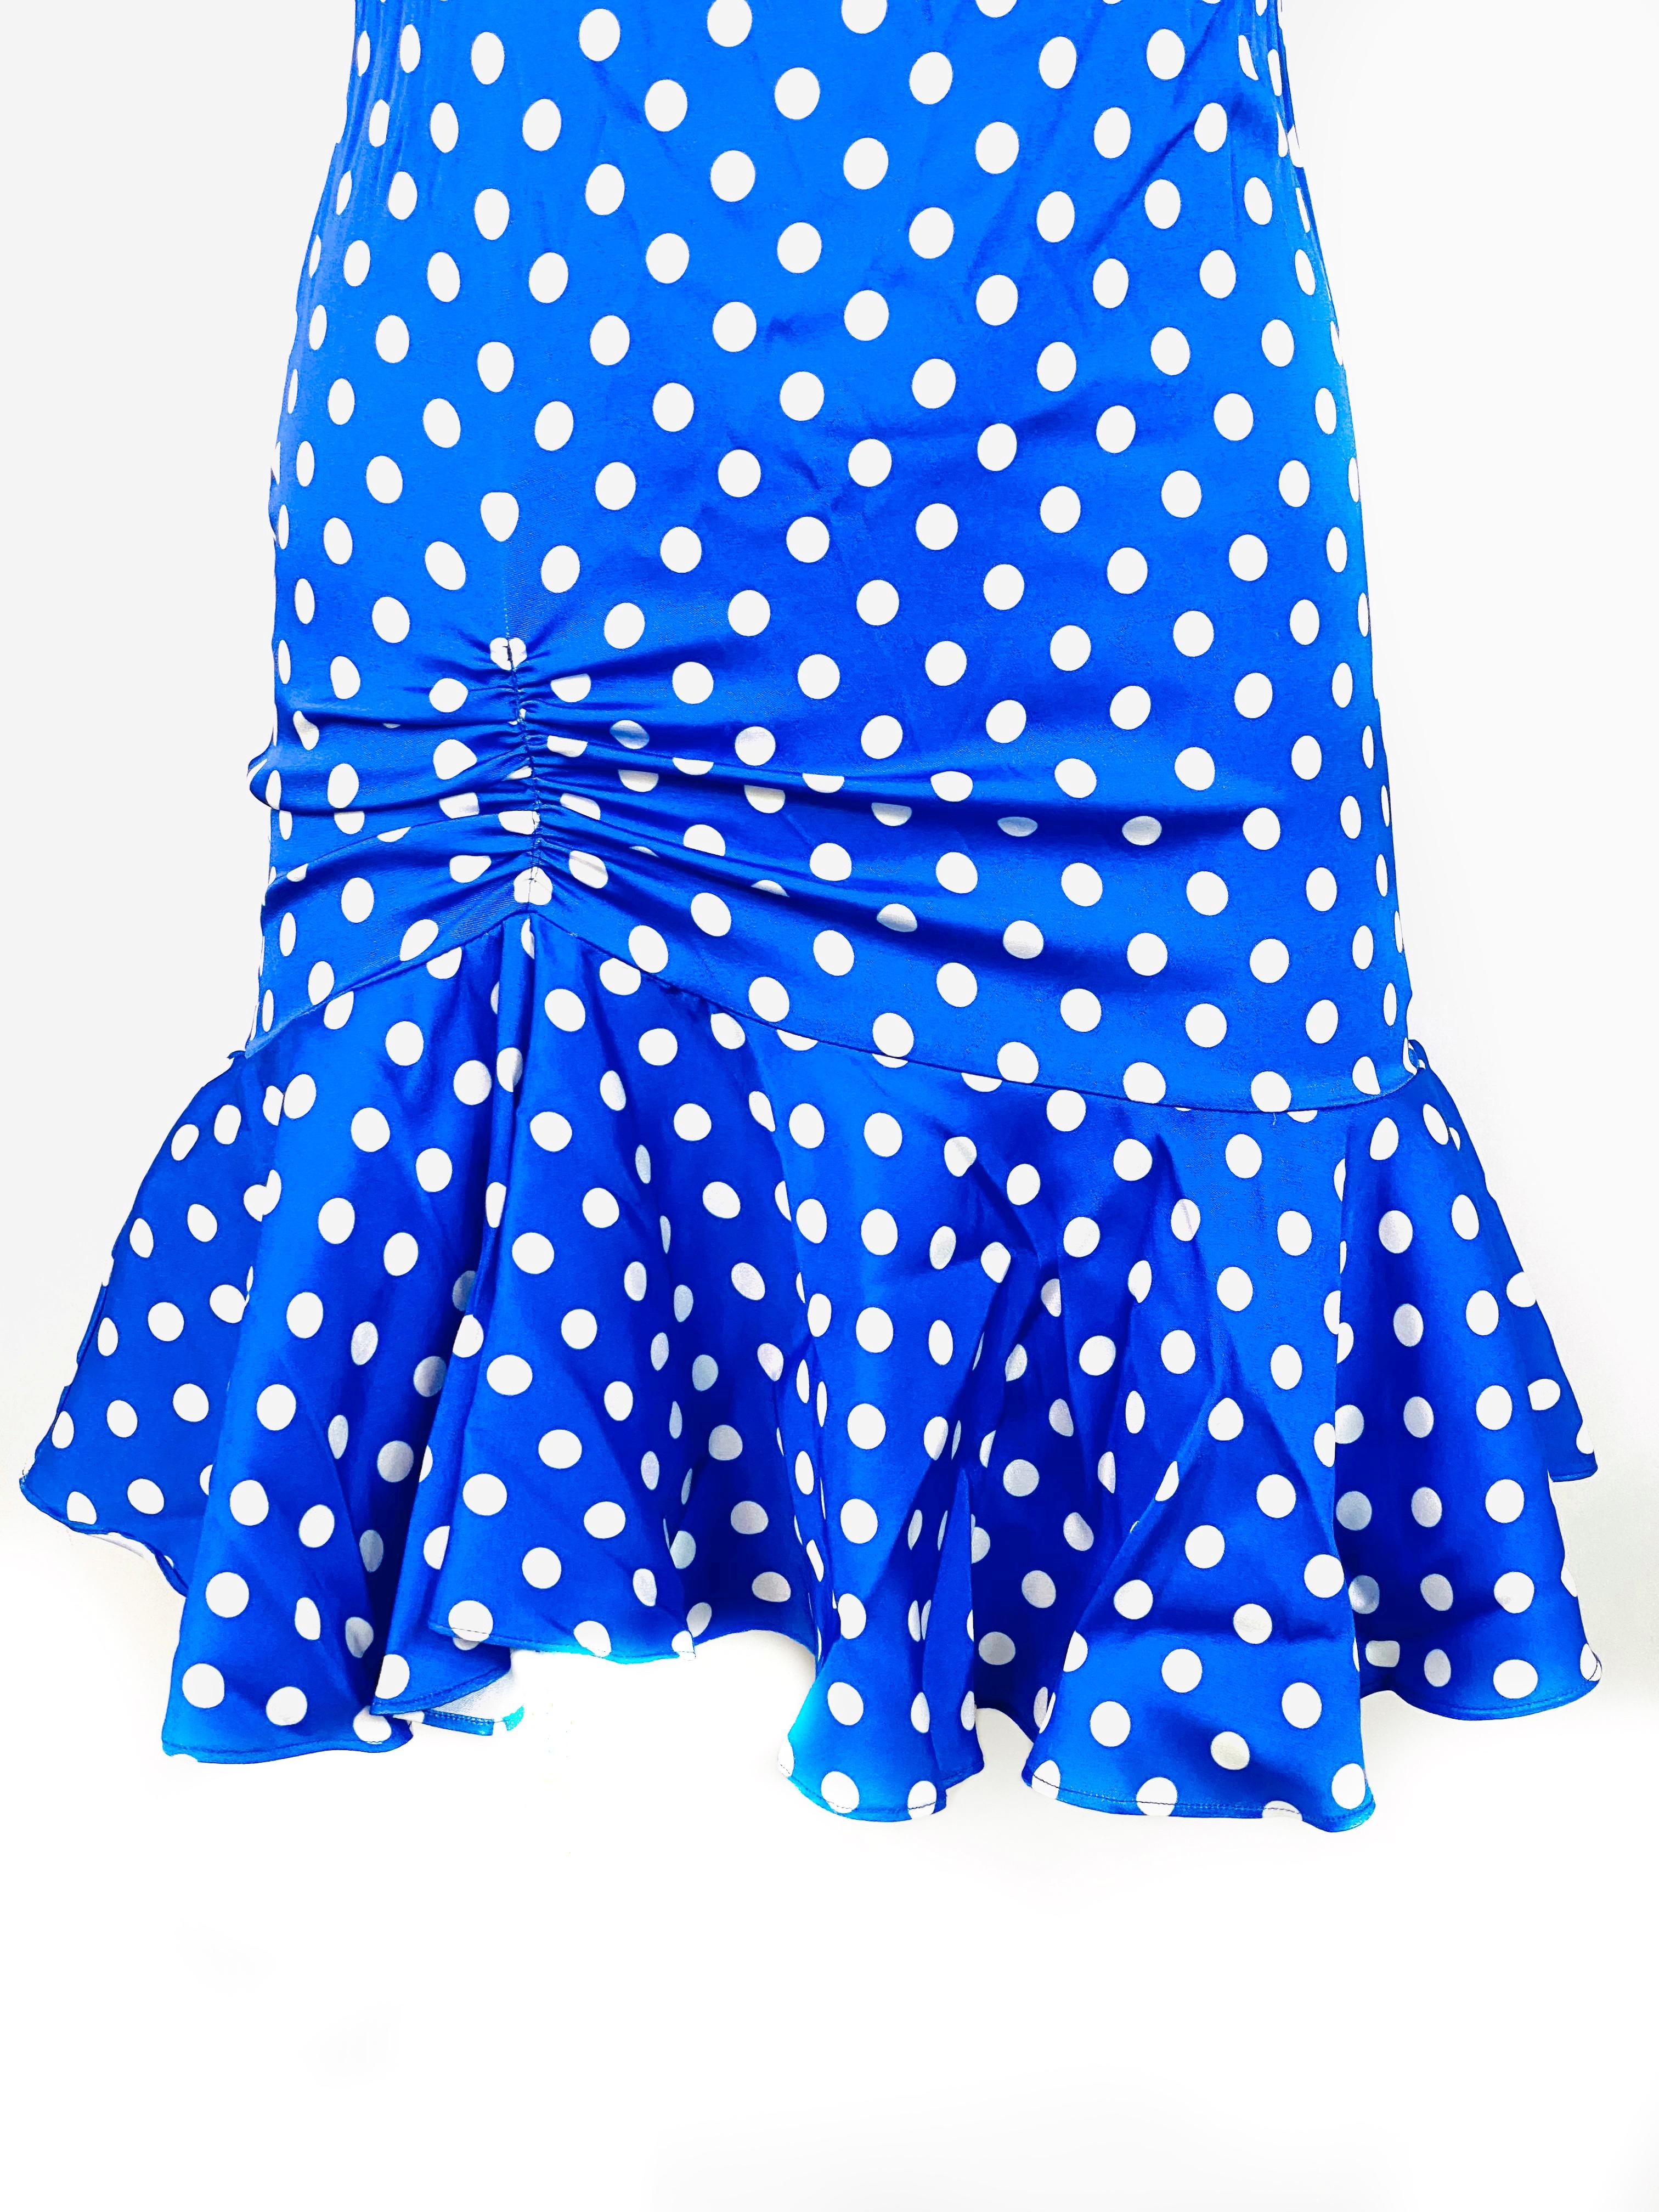 Caroline Consta Audrina Blue and White Polka Dot Mini Dress w/ Tags 

Product details:
Size M
Blue and White polka dot pattern
Mini length 
Sleeveless
Rear zip and hook closure
Made in USA
Est. Retail is $538